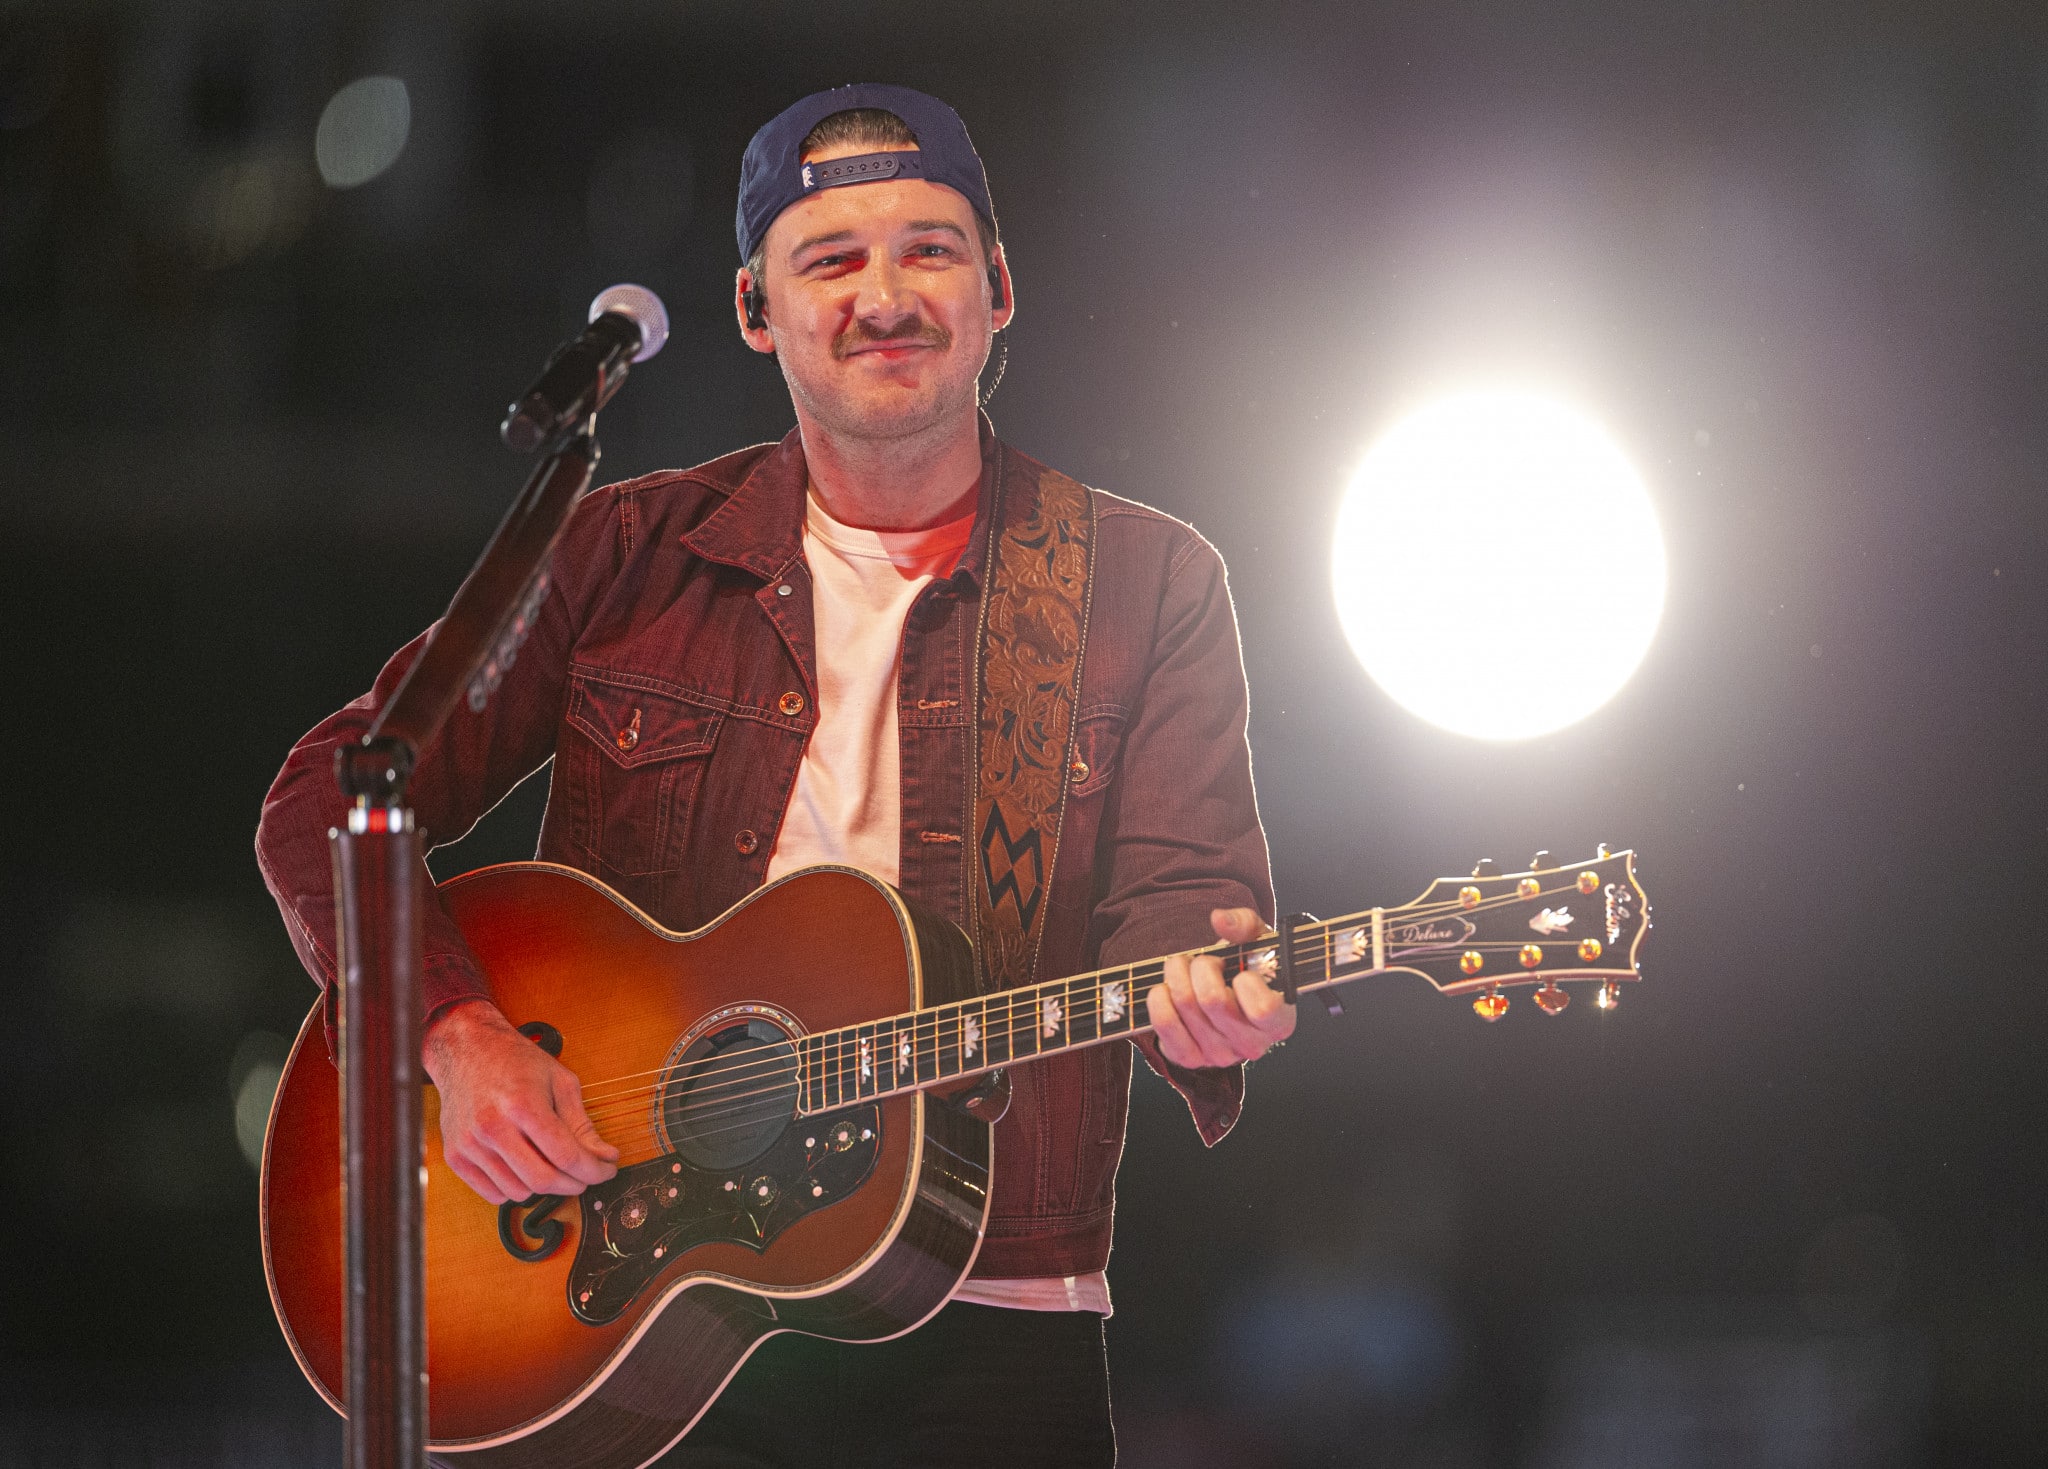 Morgan Wallen performs the song "'98 Braves" at the 2023 Billboard Music Awards at Truist Park in Atlanta, Georgia. The show airs on November 19, 2023 on BBMAs.